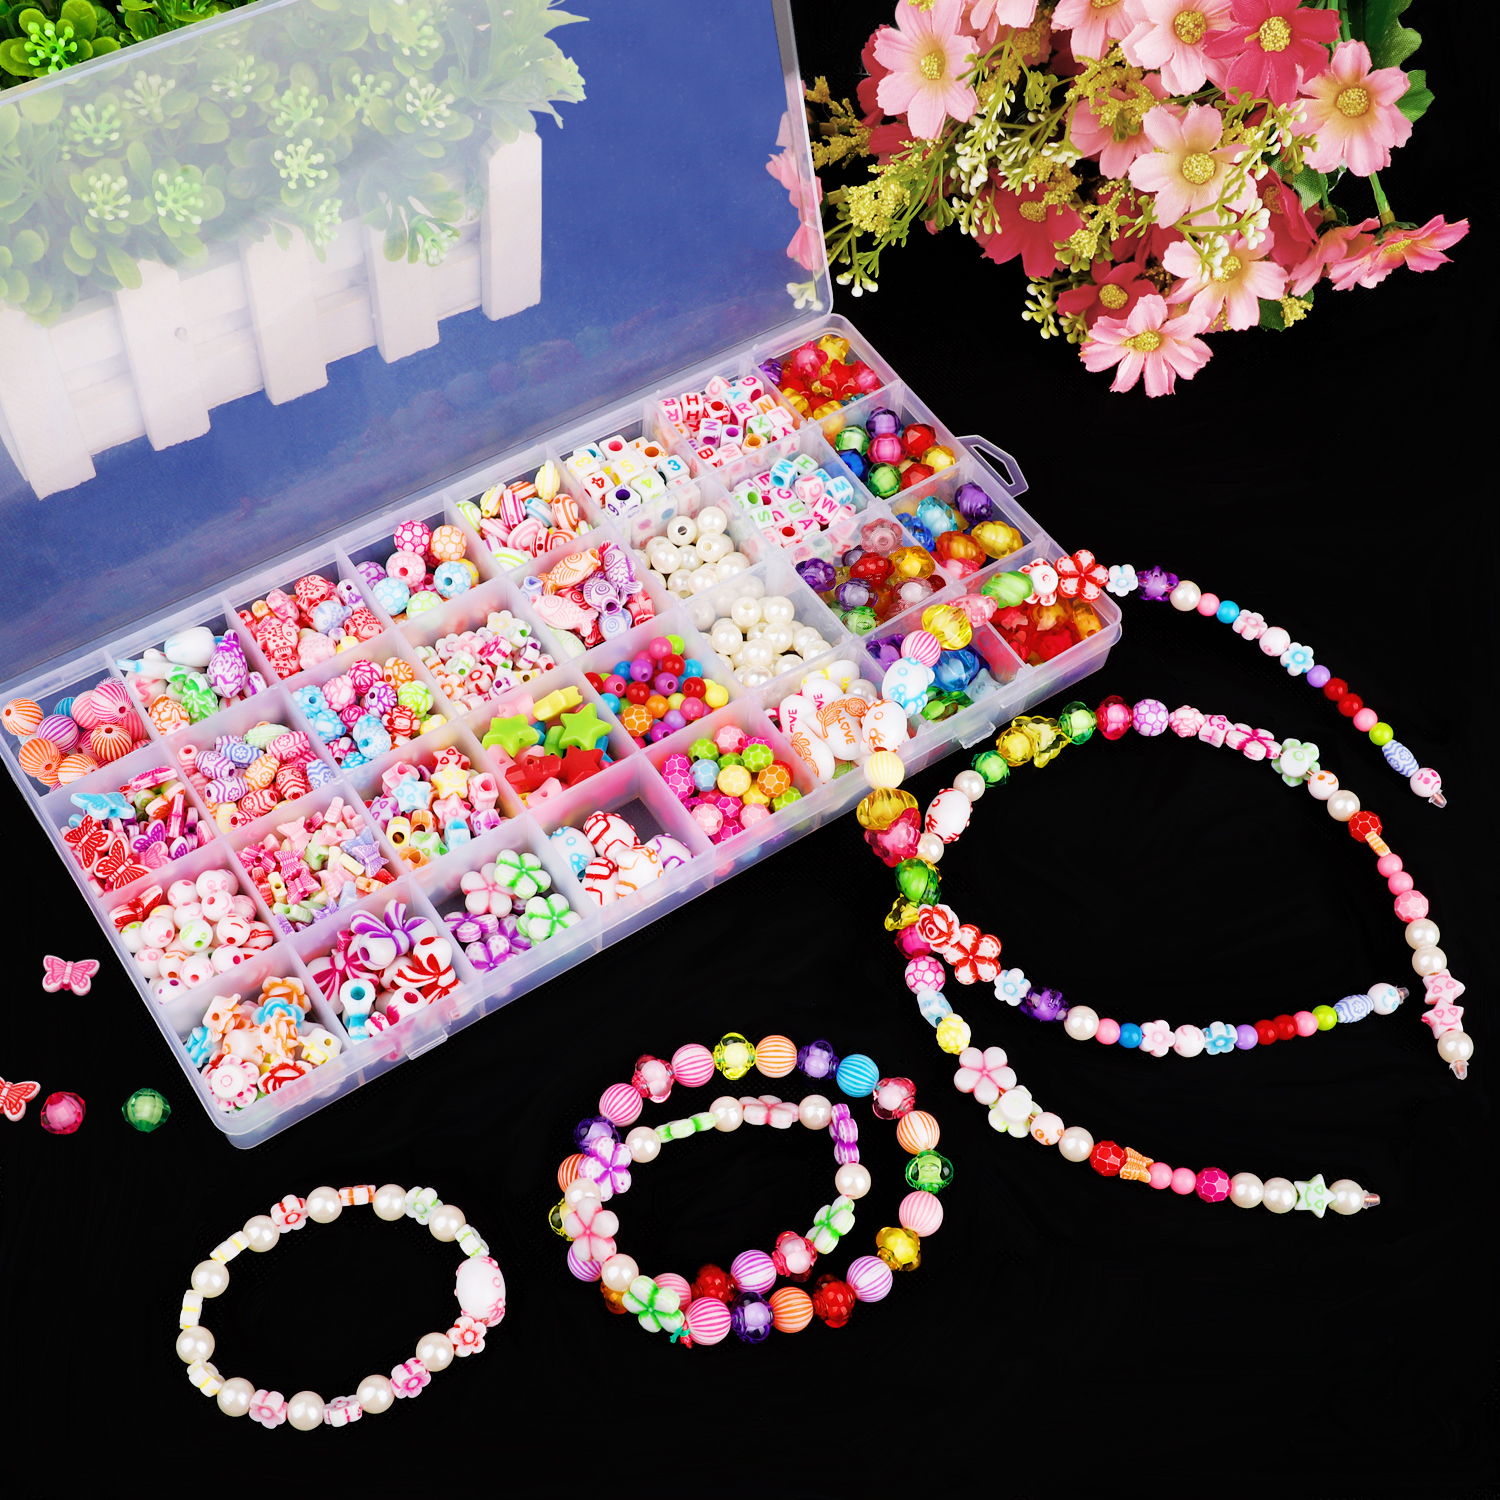 32 Styles Beads Set forJewellery Making Kids &Crafts&Name Bracelets And DIY Necklace Bracelets Letter Alphabet Colorful Acrylic Crafting Beads Kit Box with Accessories - image 4 of 9